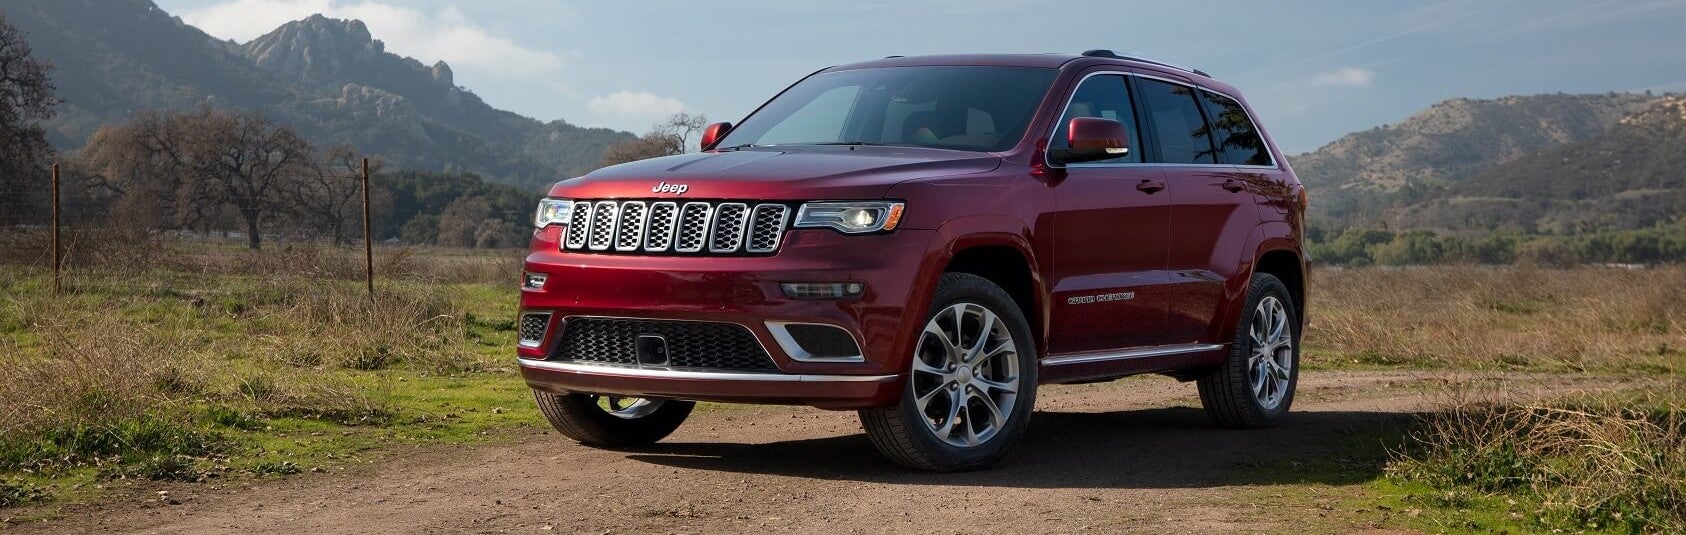 Pre-Owned Jeep Models near Southgate